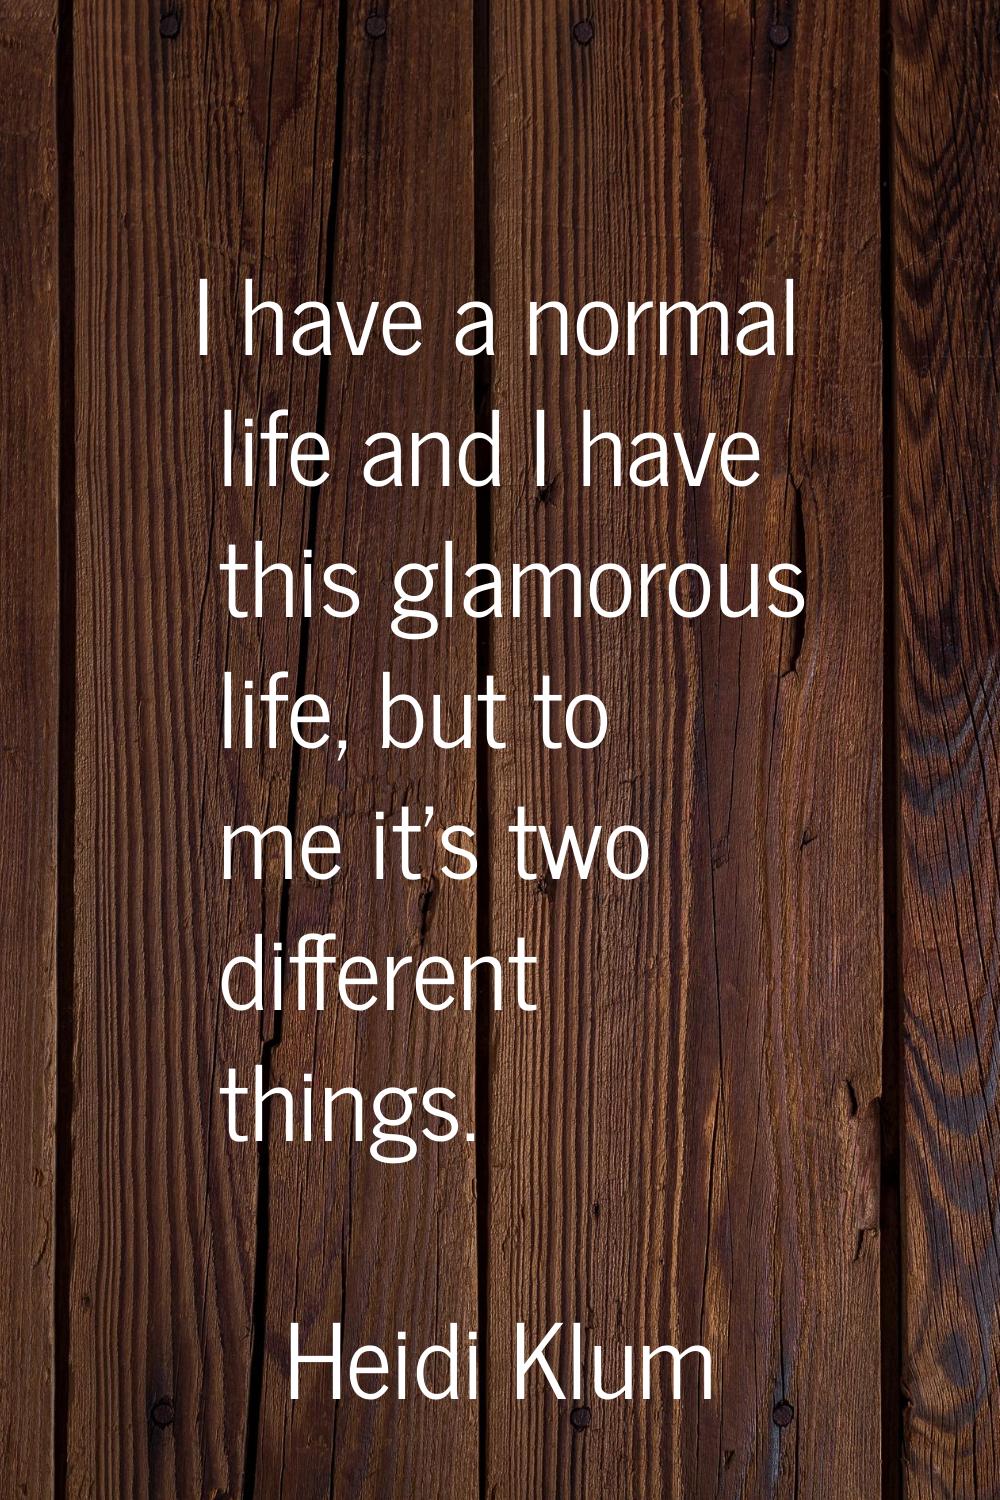 I have a normal life and I have this glamorous life, but to me it's two different things.